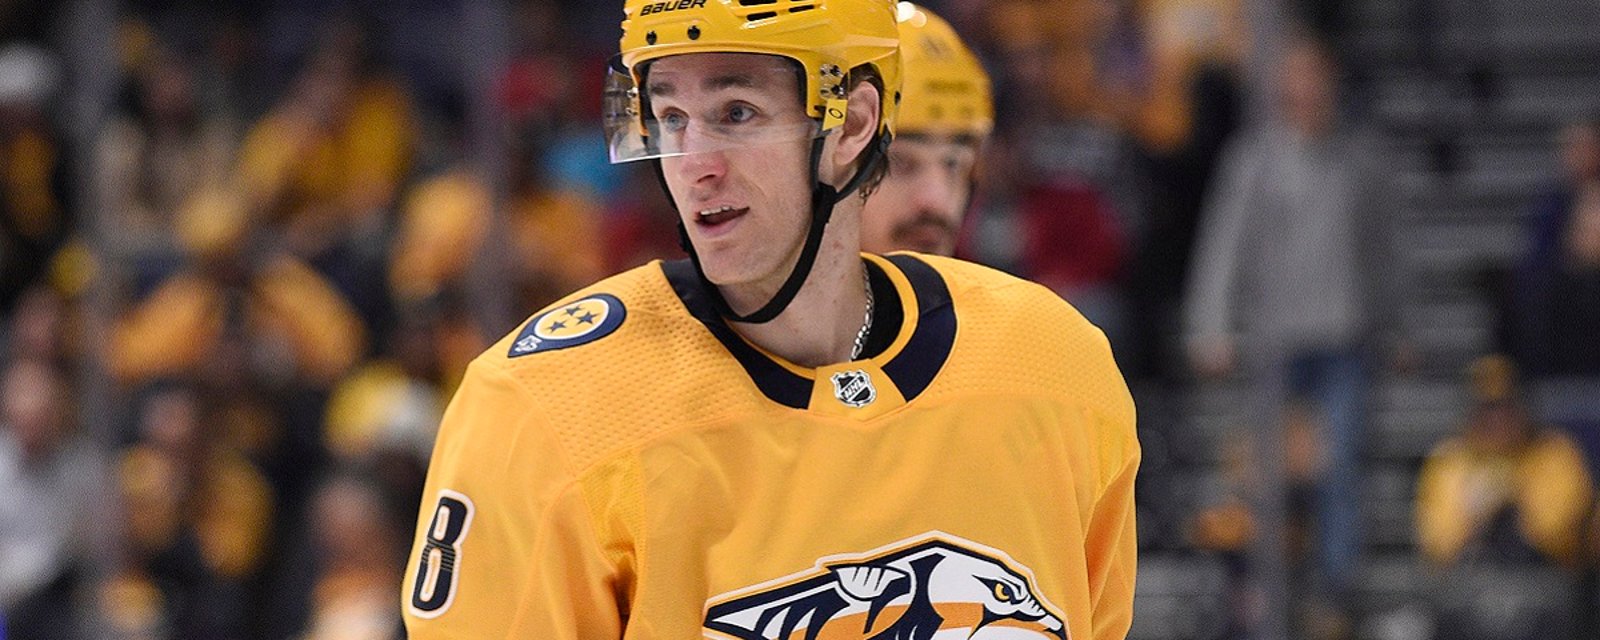 Shocking move from the Predators indicates Kyle Turris is done in Nashville.